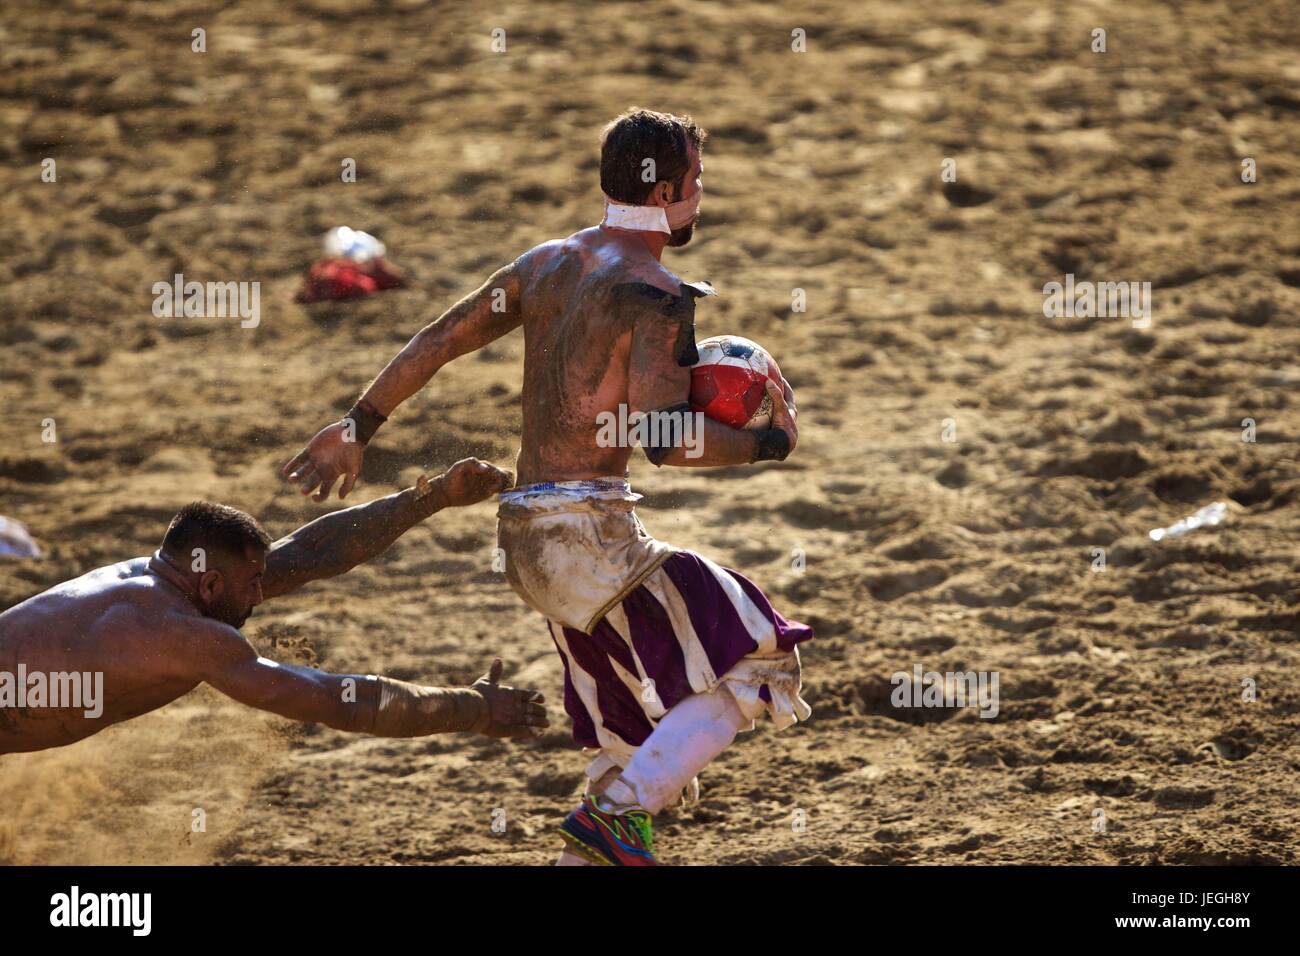 Florence, Italy. 24th June, 2017. Players compete during the final match of the Calcio Storico Fiorentino traditional 16th Century Renaissance ball game at Santa Croce square in Florence, central Italy, June 24, 2017. Calcio Storico Fiorentino, an early form of football from the 16th century, originated from the ancient roman "harpastum". Credit: Jin Yu/Xinhua/Alamy Live News Stock Photo